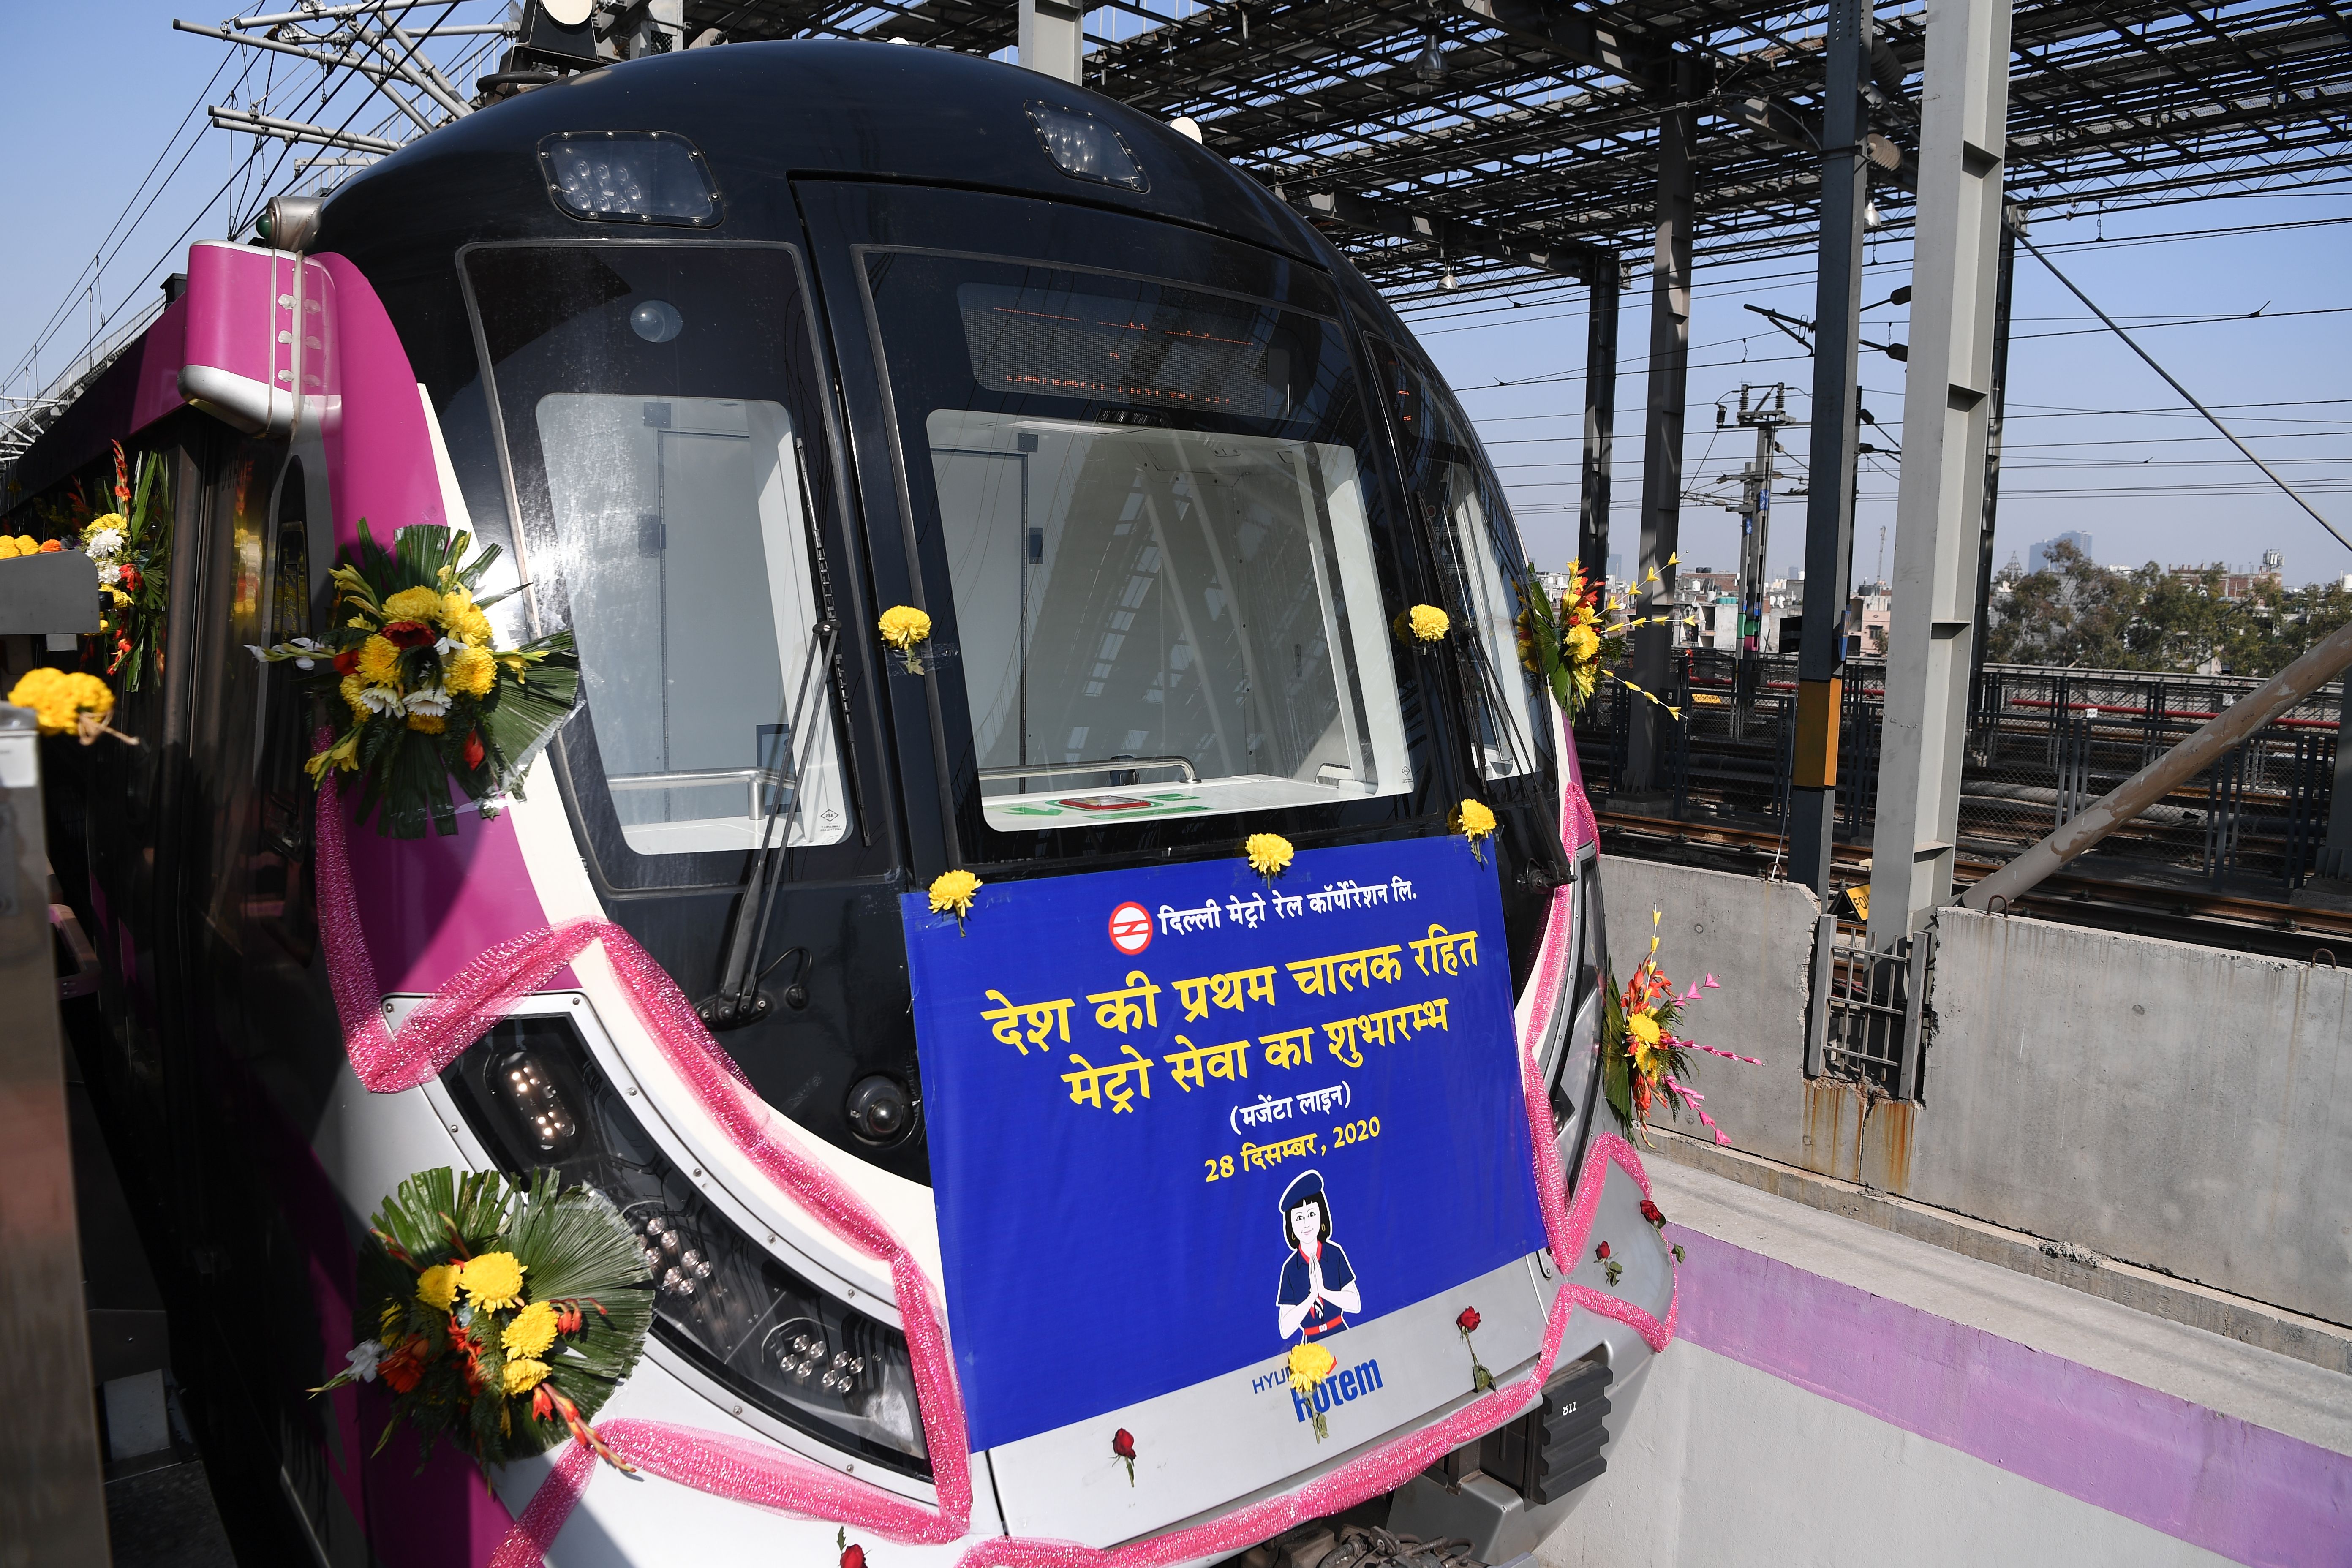 Flowers adorn the front of India’s first driverless metro train at a station during its inauguration in New Delhi on December 28, 2020